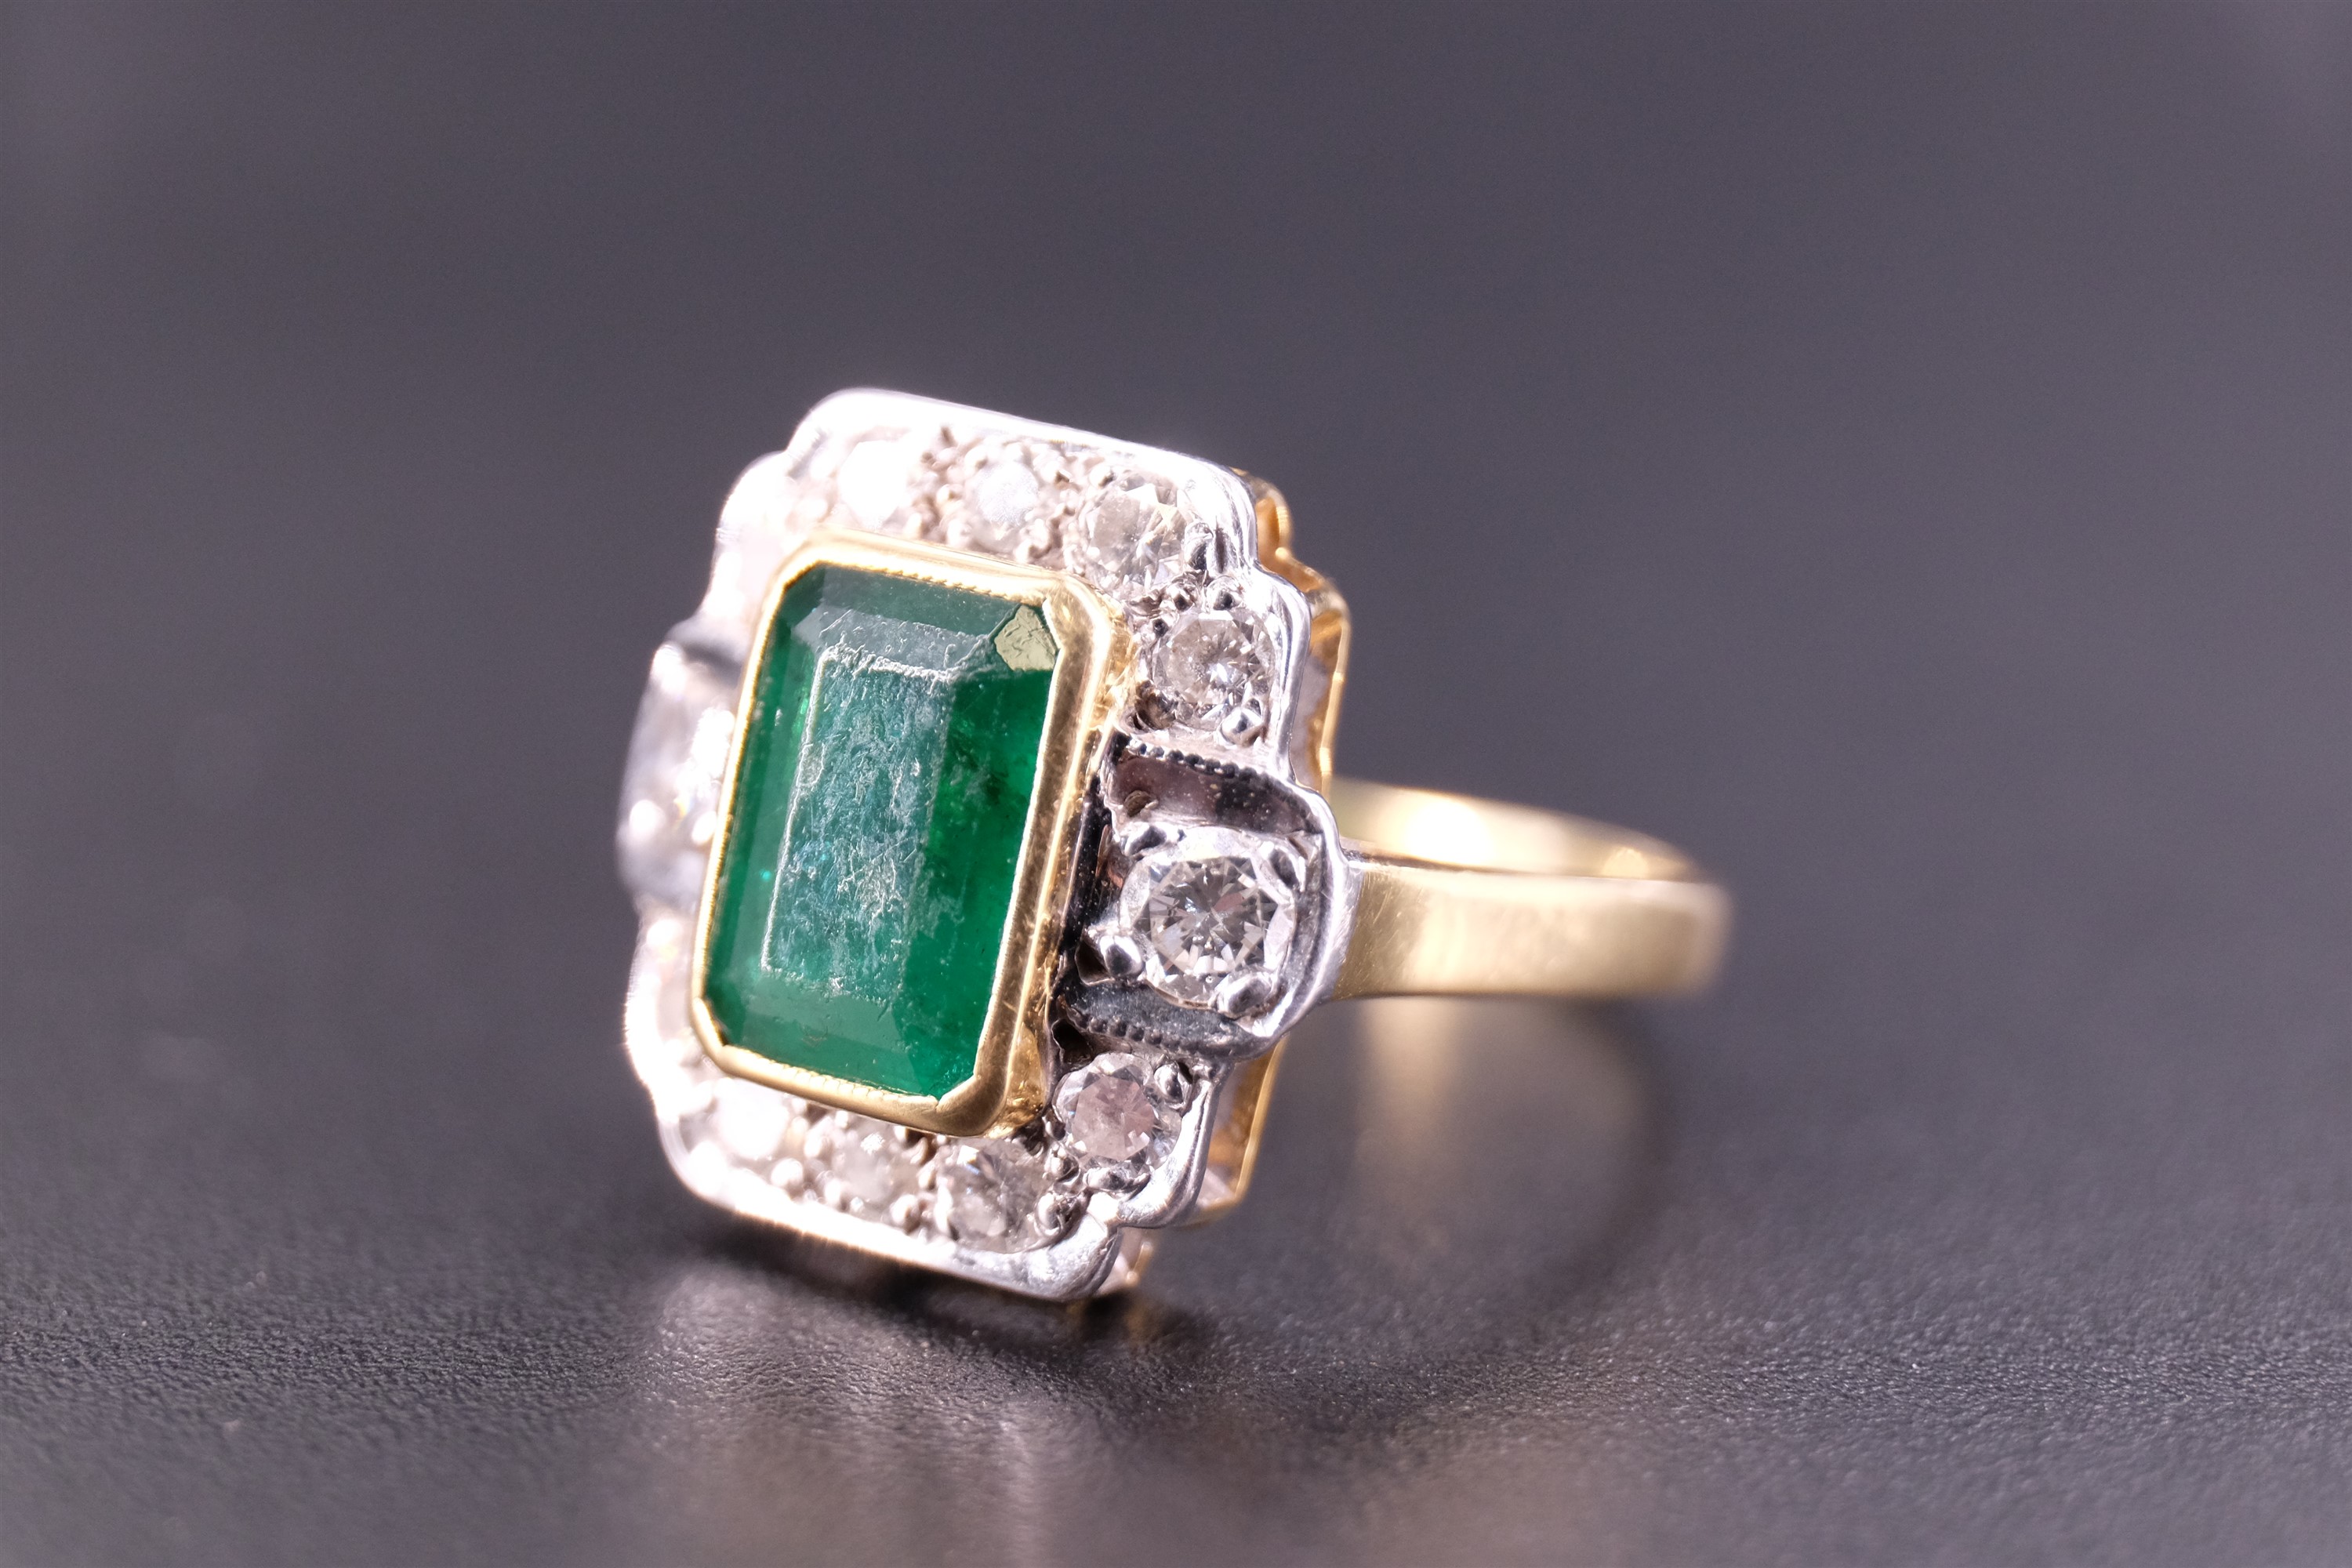 An Art Deco emerald and diamond ring, the central 'emerald' cut 1.75 carat emerald set in a yellow